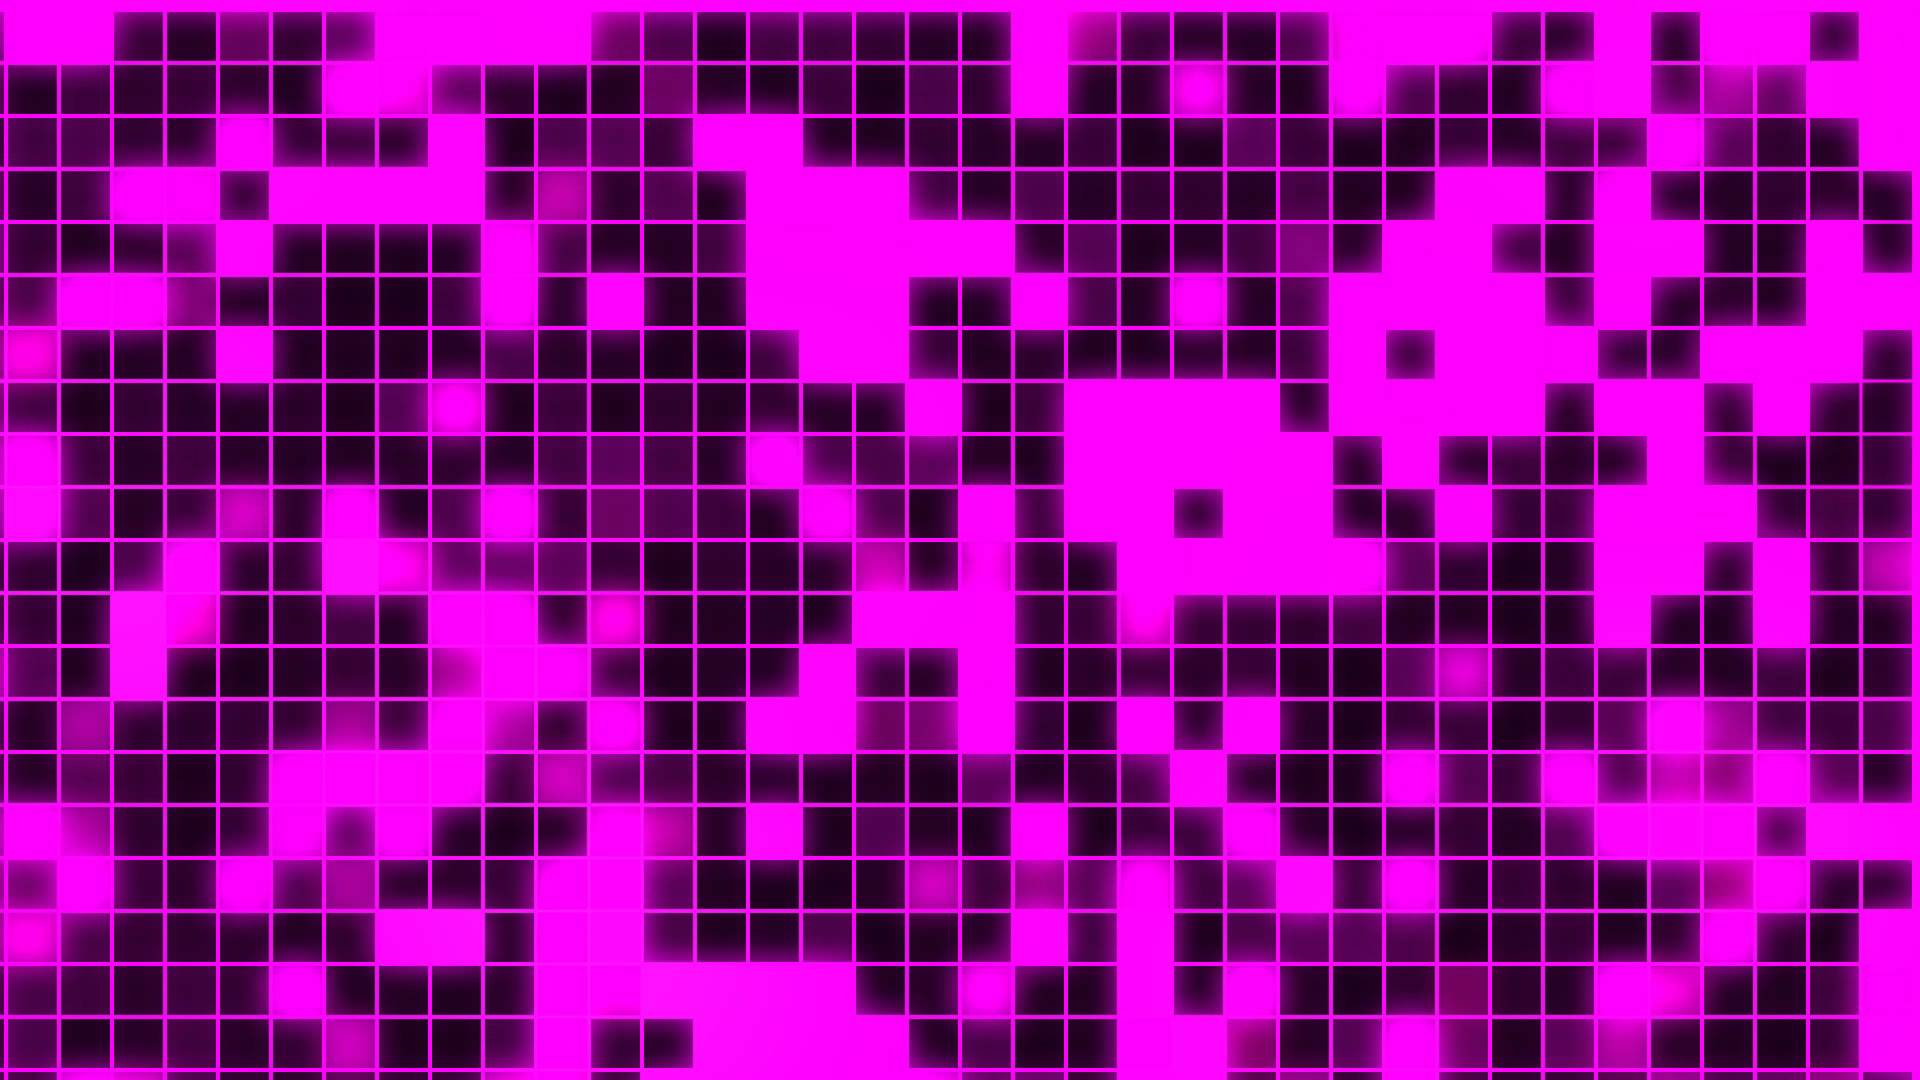 Videogame Background ANIMATION FREE FOOTAGE HD Pink square - YouTube